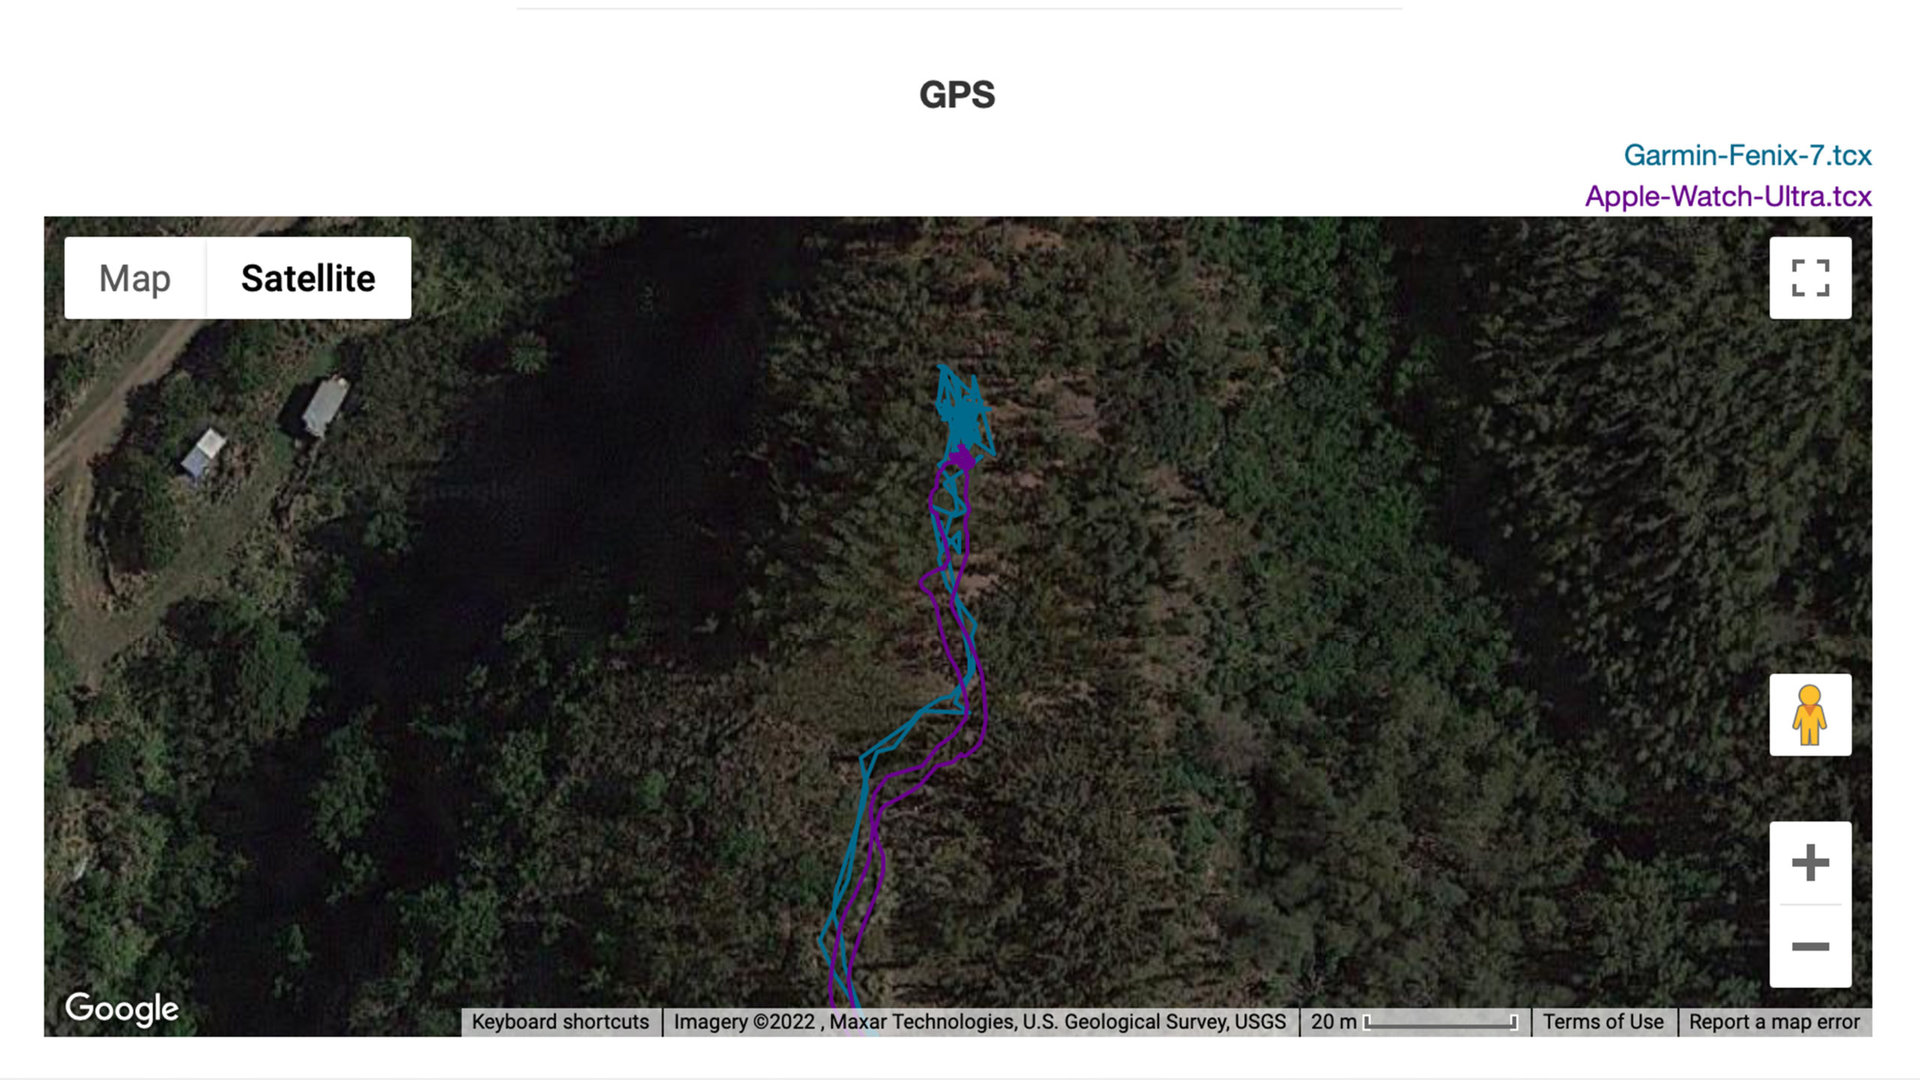 GPS data shows an Apple Watch Ultra tracing the route of an out-and-back hike.